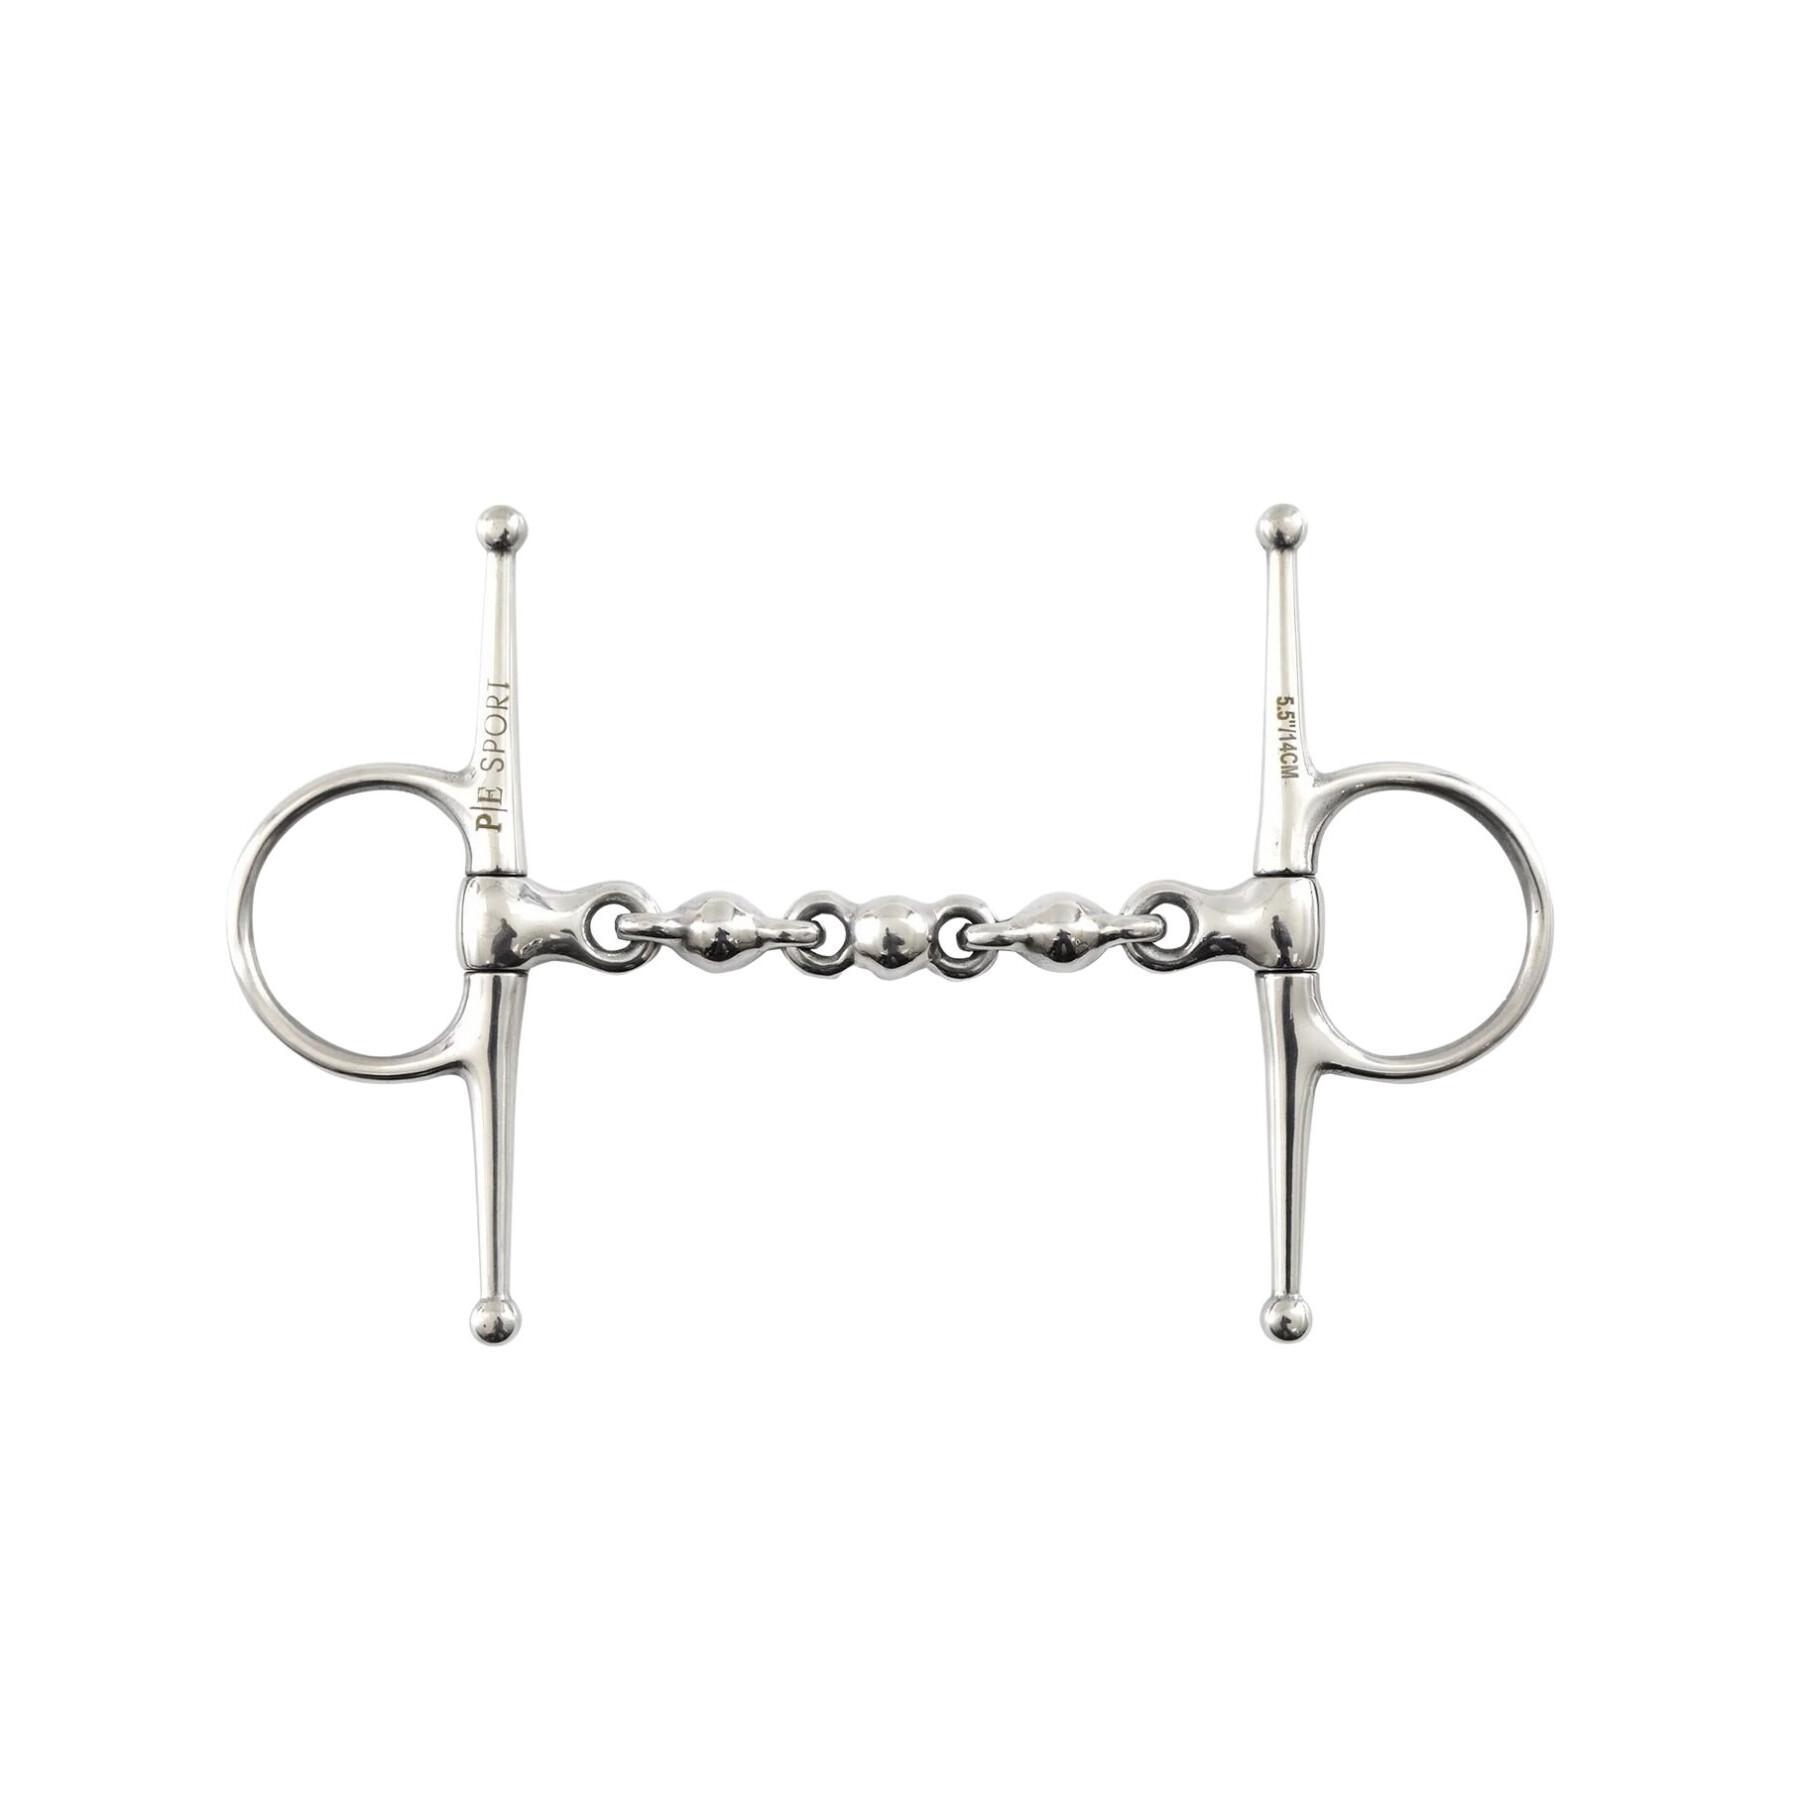 Needle jaws with stainless steel balls Premier Equine Waterford